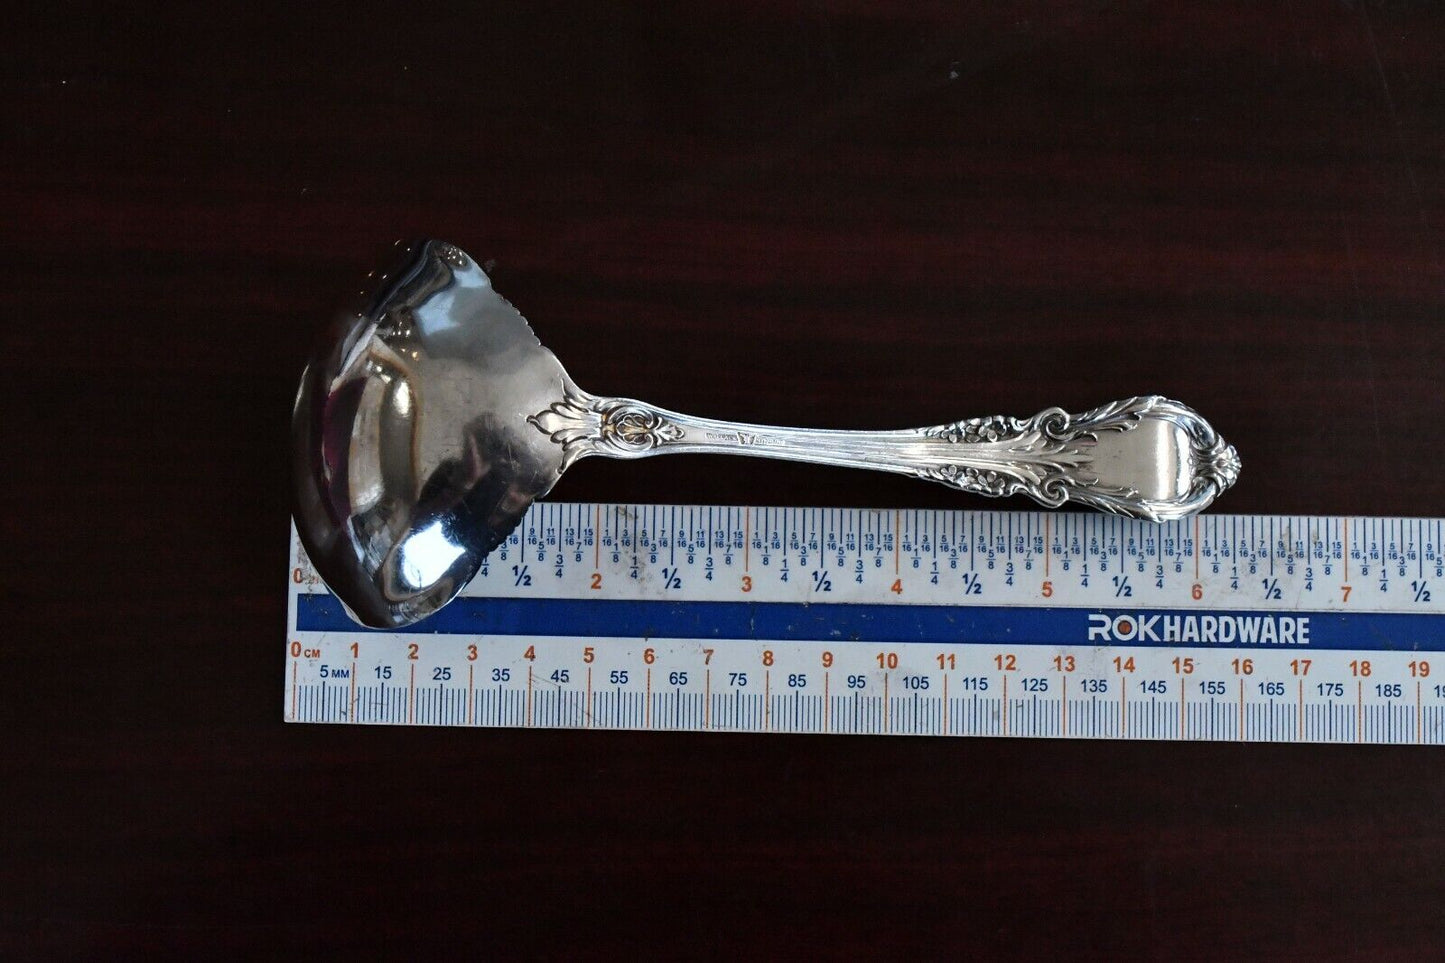 Sir Christopher by Wallace Sterling Silver 6 1/4" Solid Gravy Ladle 2.2 oz